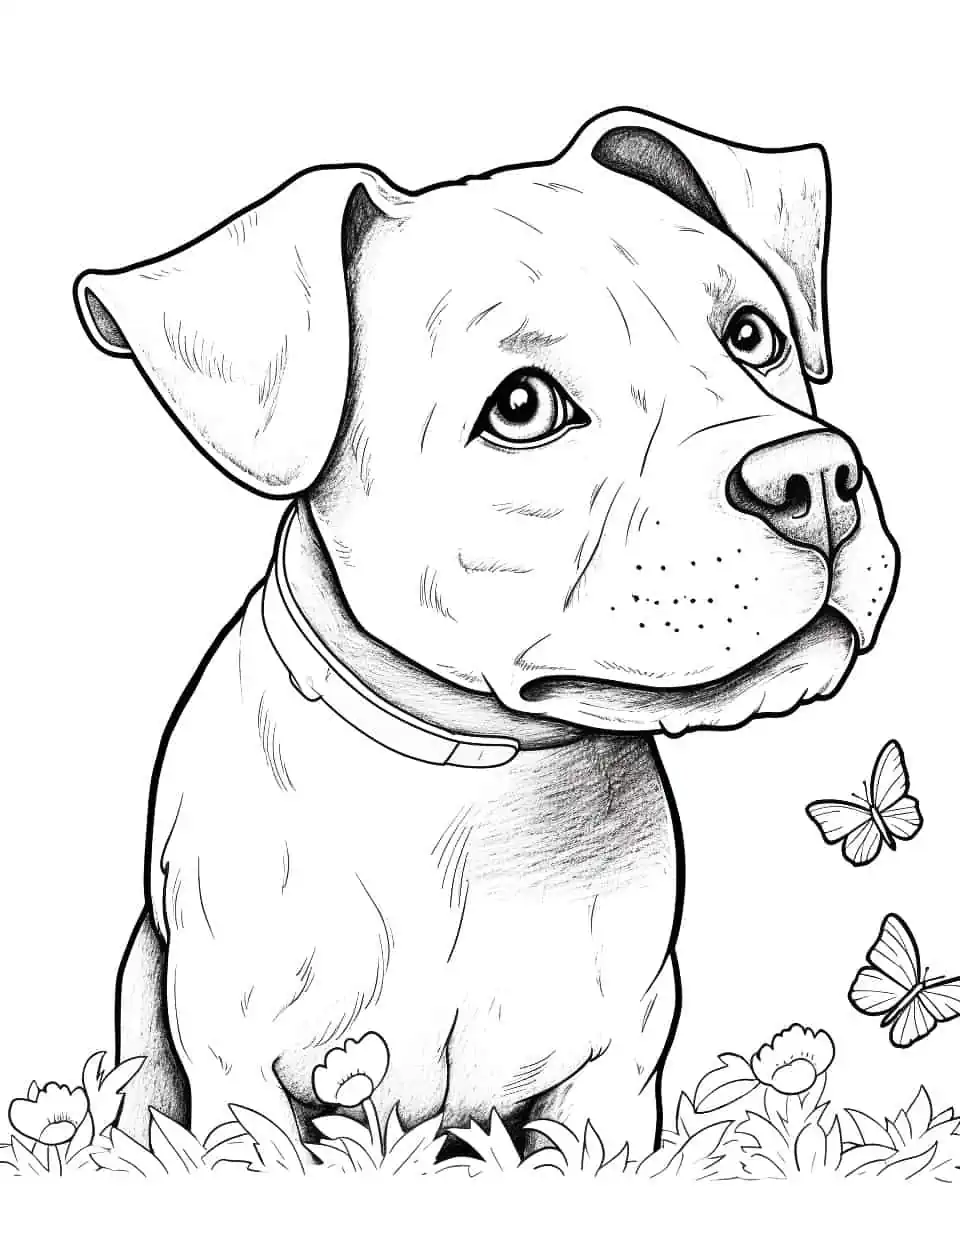 Pitbull and the Butterfly Coloring Page - A pitbull curiously watching a butterfly flying in the garden.